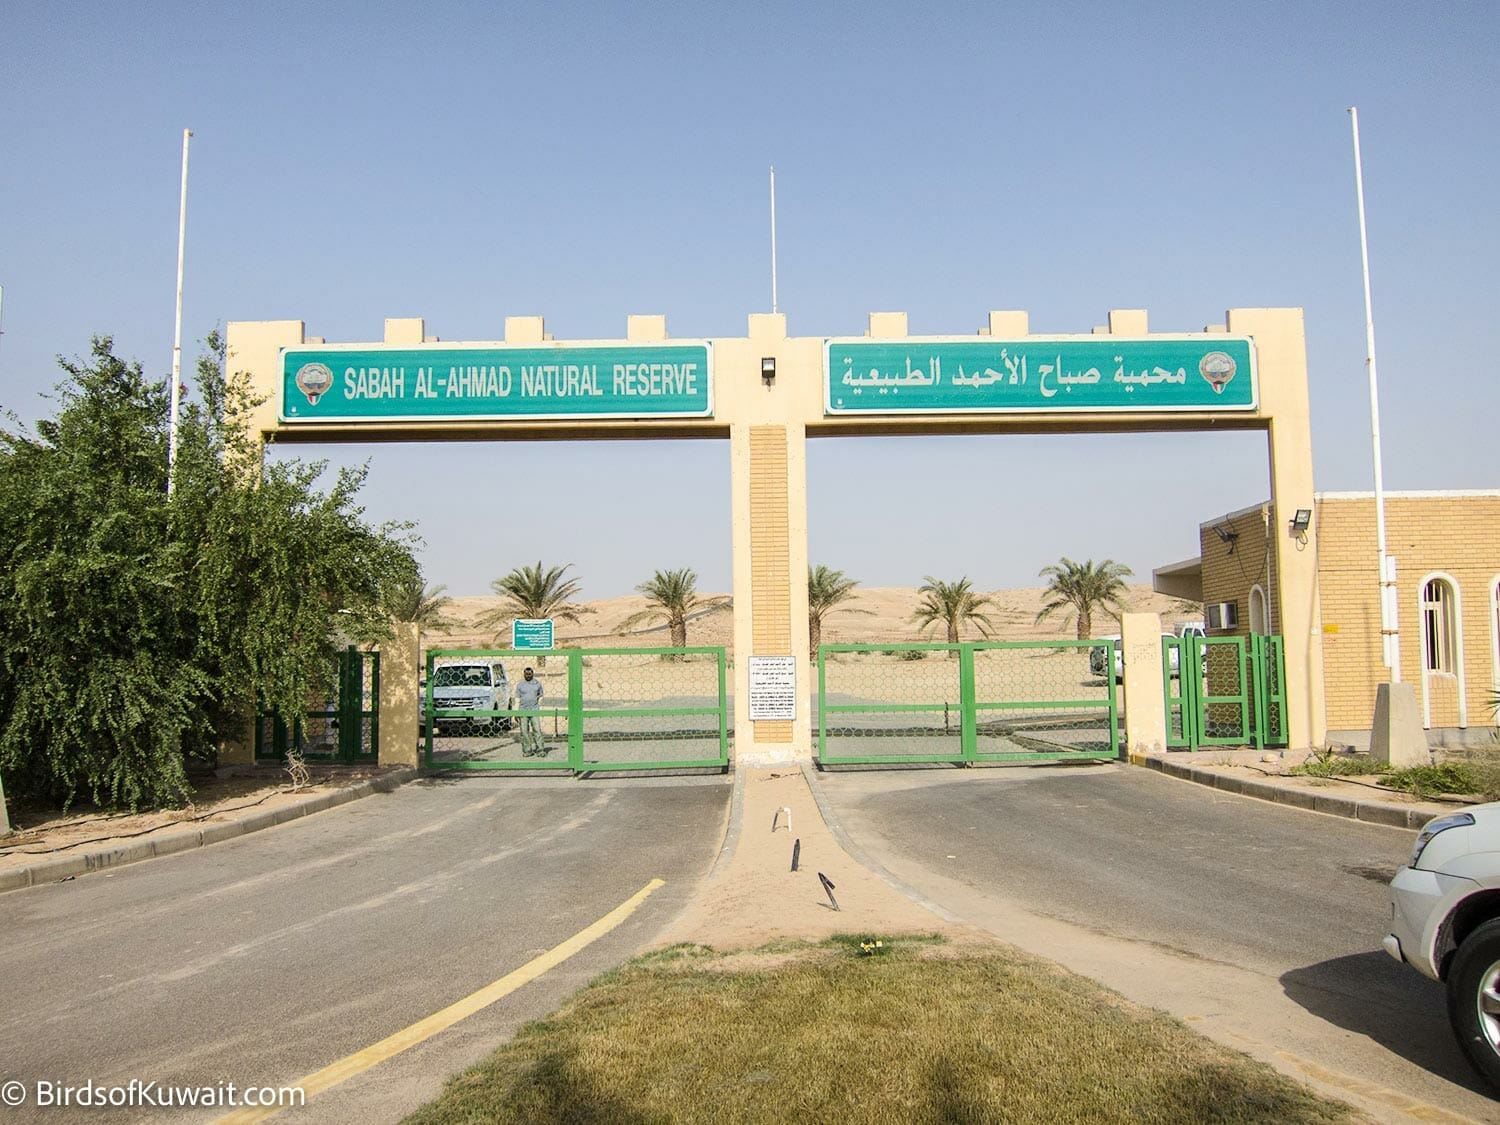 Sabah Al-Ahmad Natural Reserve, the main gate to the desert section